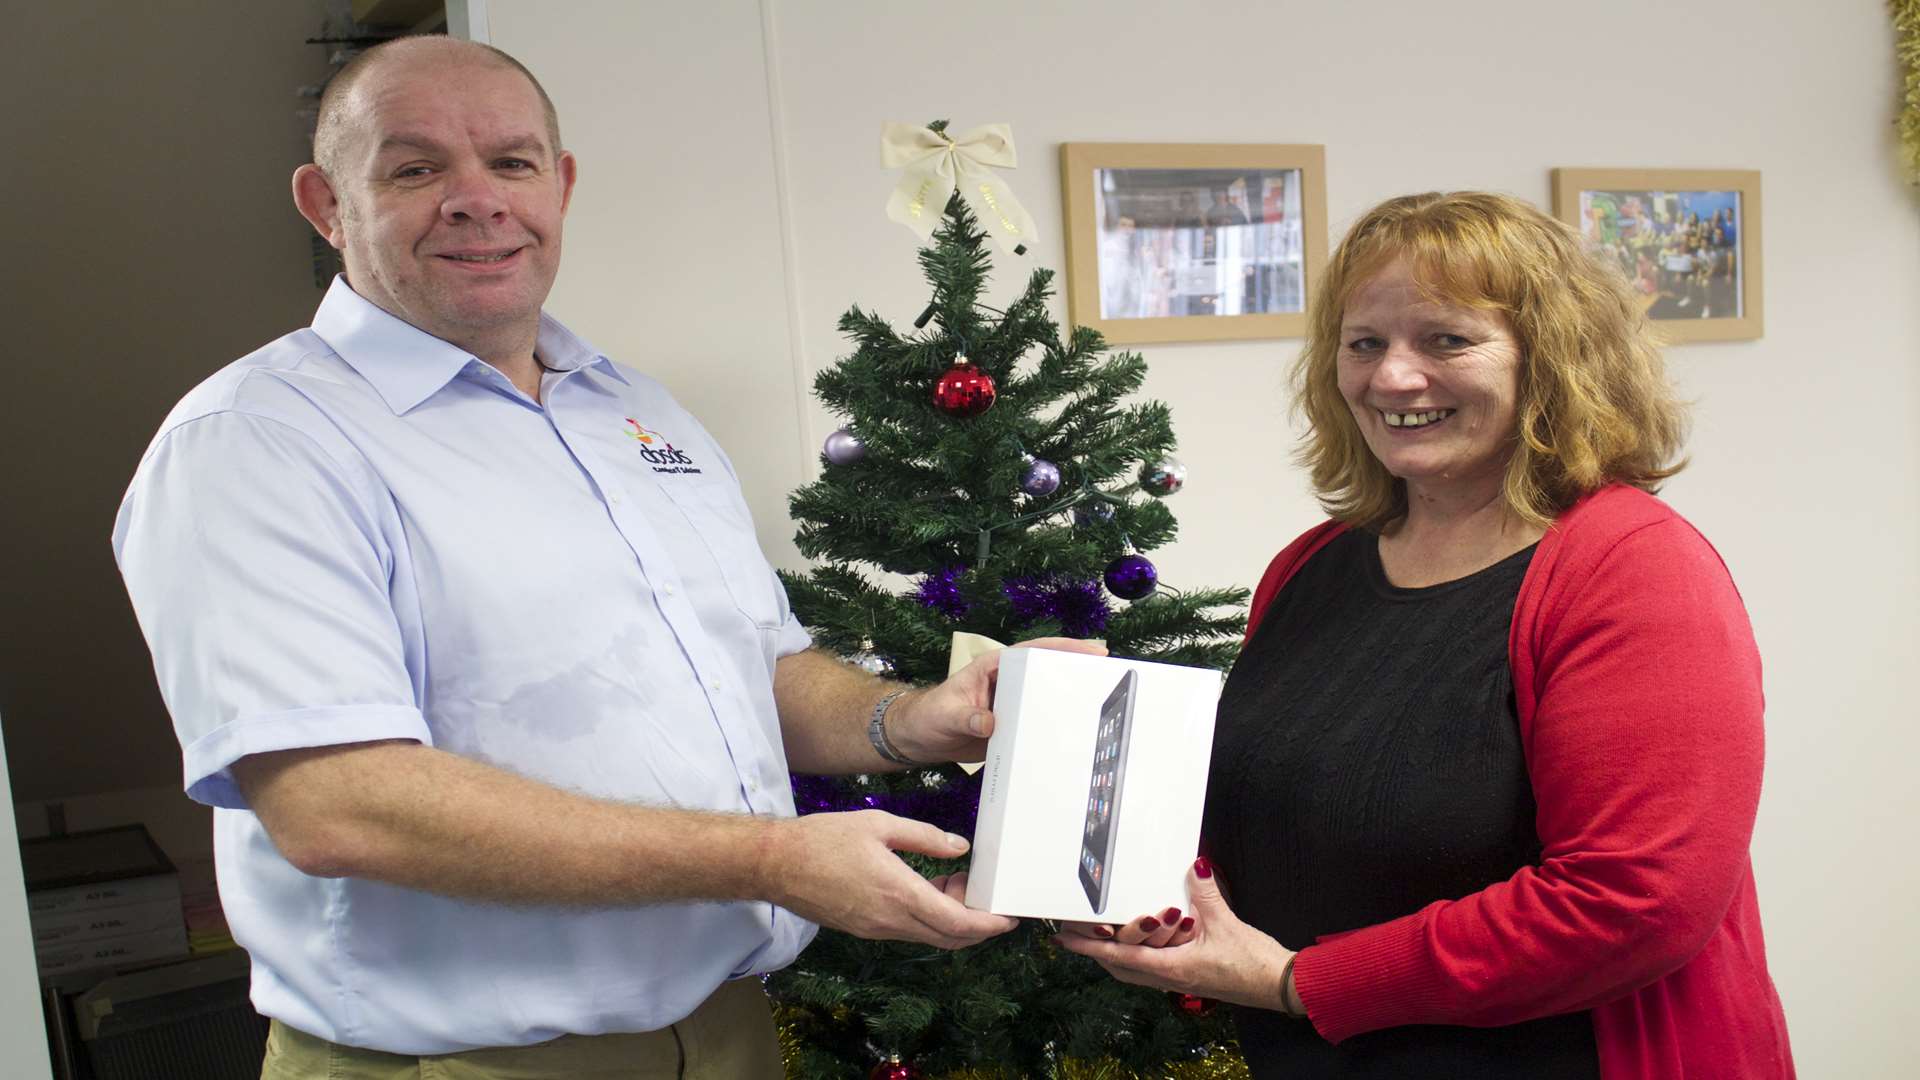 Ian Wilkinson, managing director at Absols Complete IT Solutions, presents the iPad to Carol Bentall, chief executive, Young Kent.